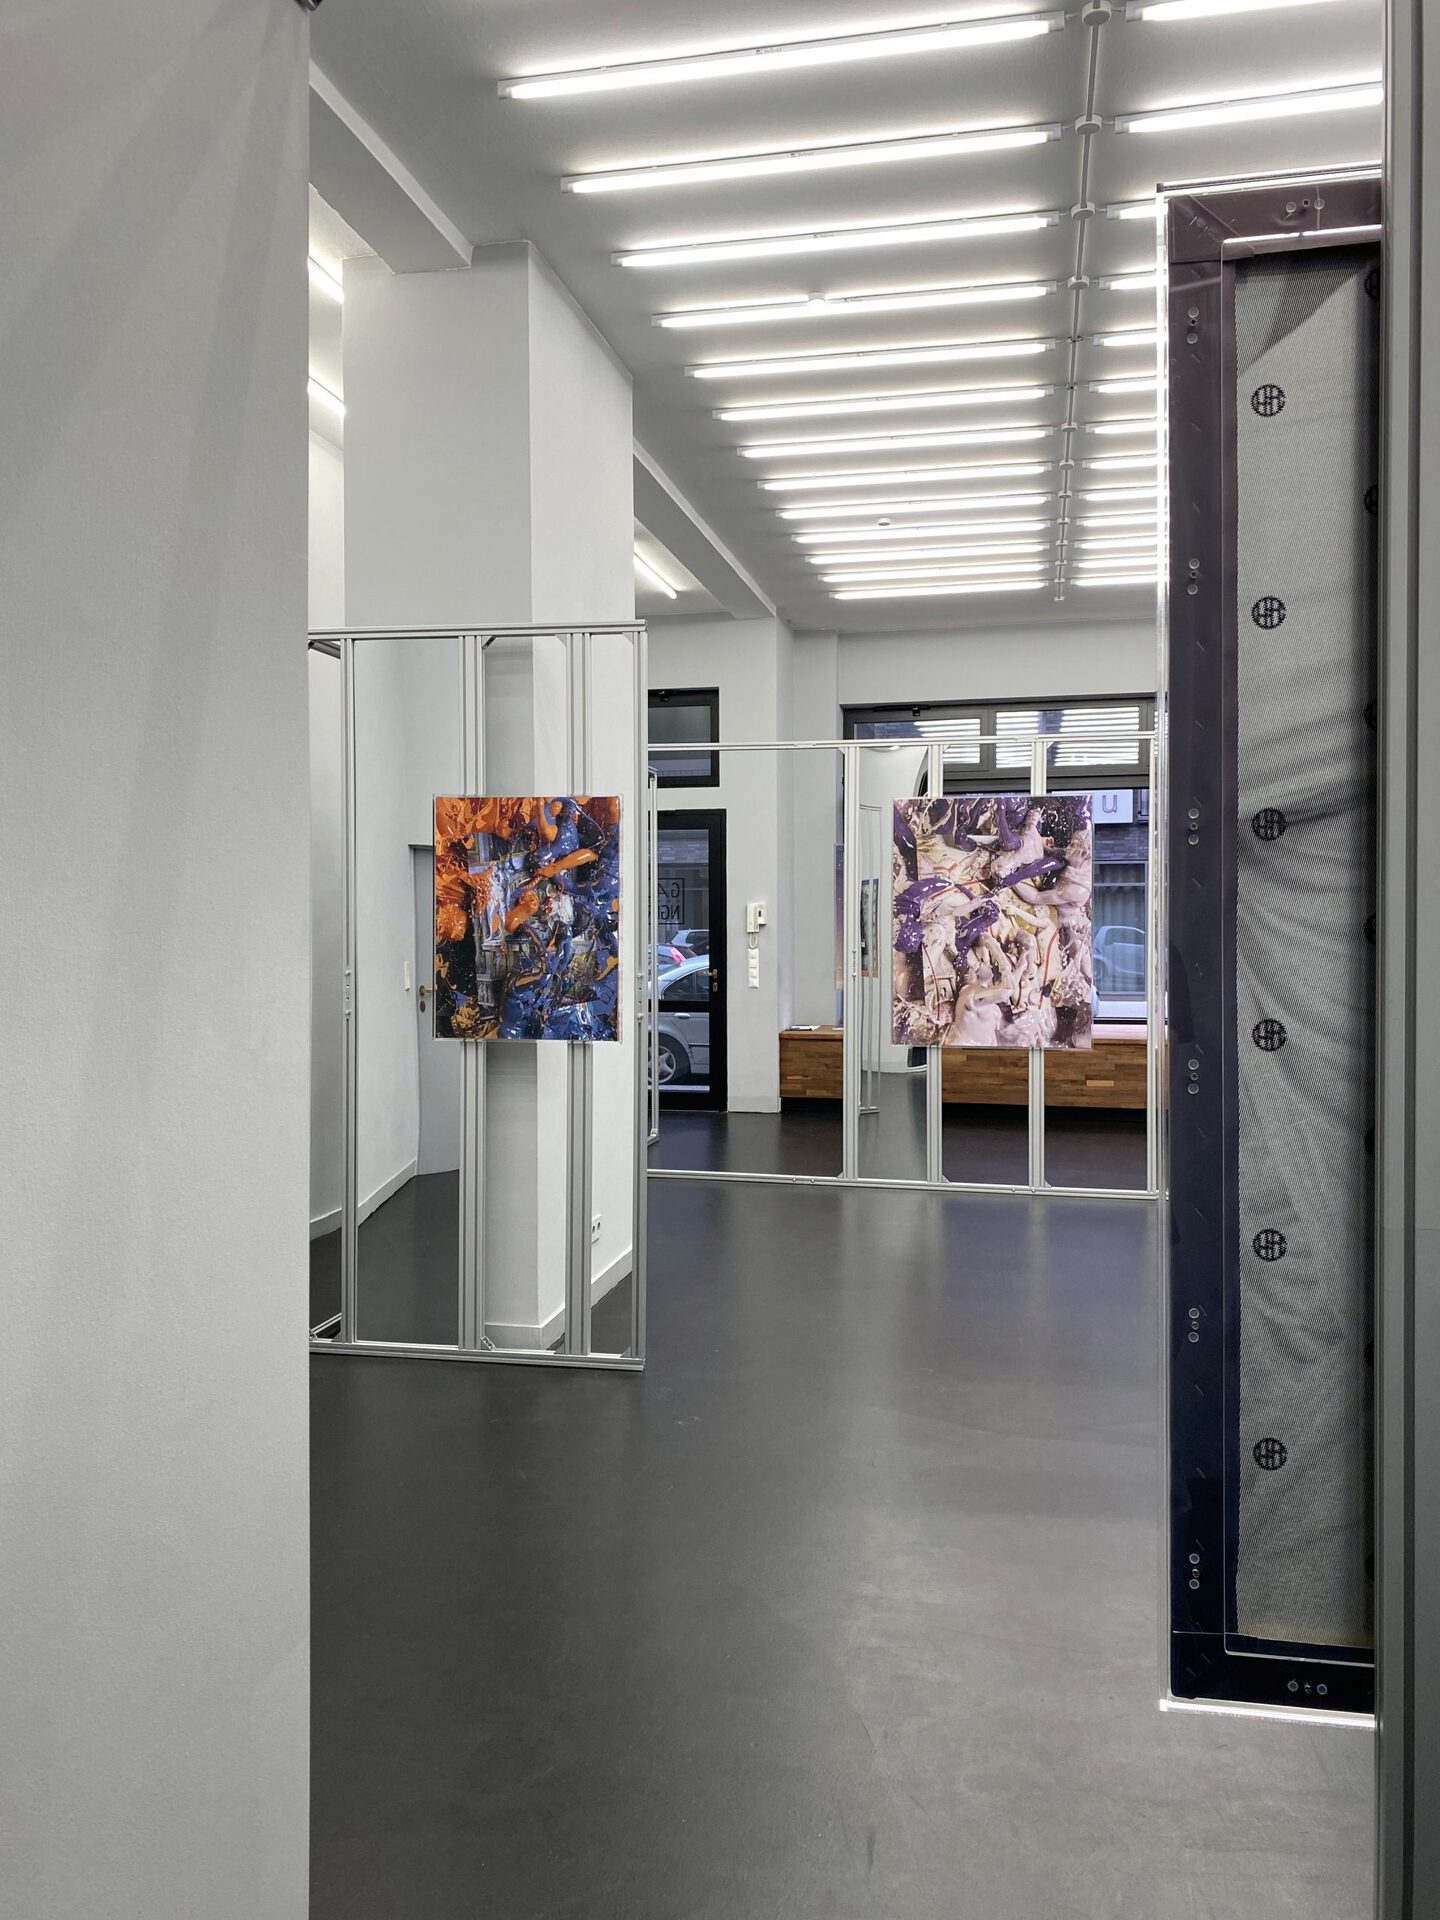 Christian Holze - Fear &amp; Greed - Installation View